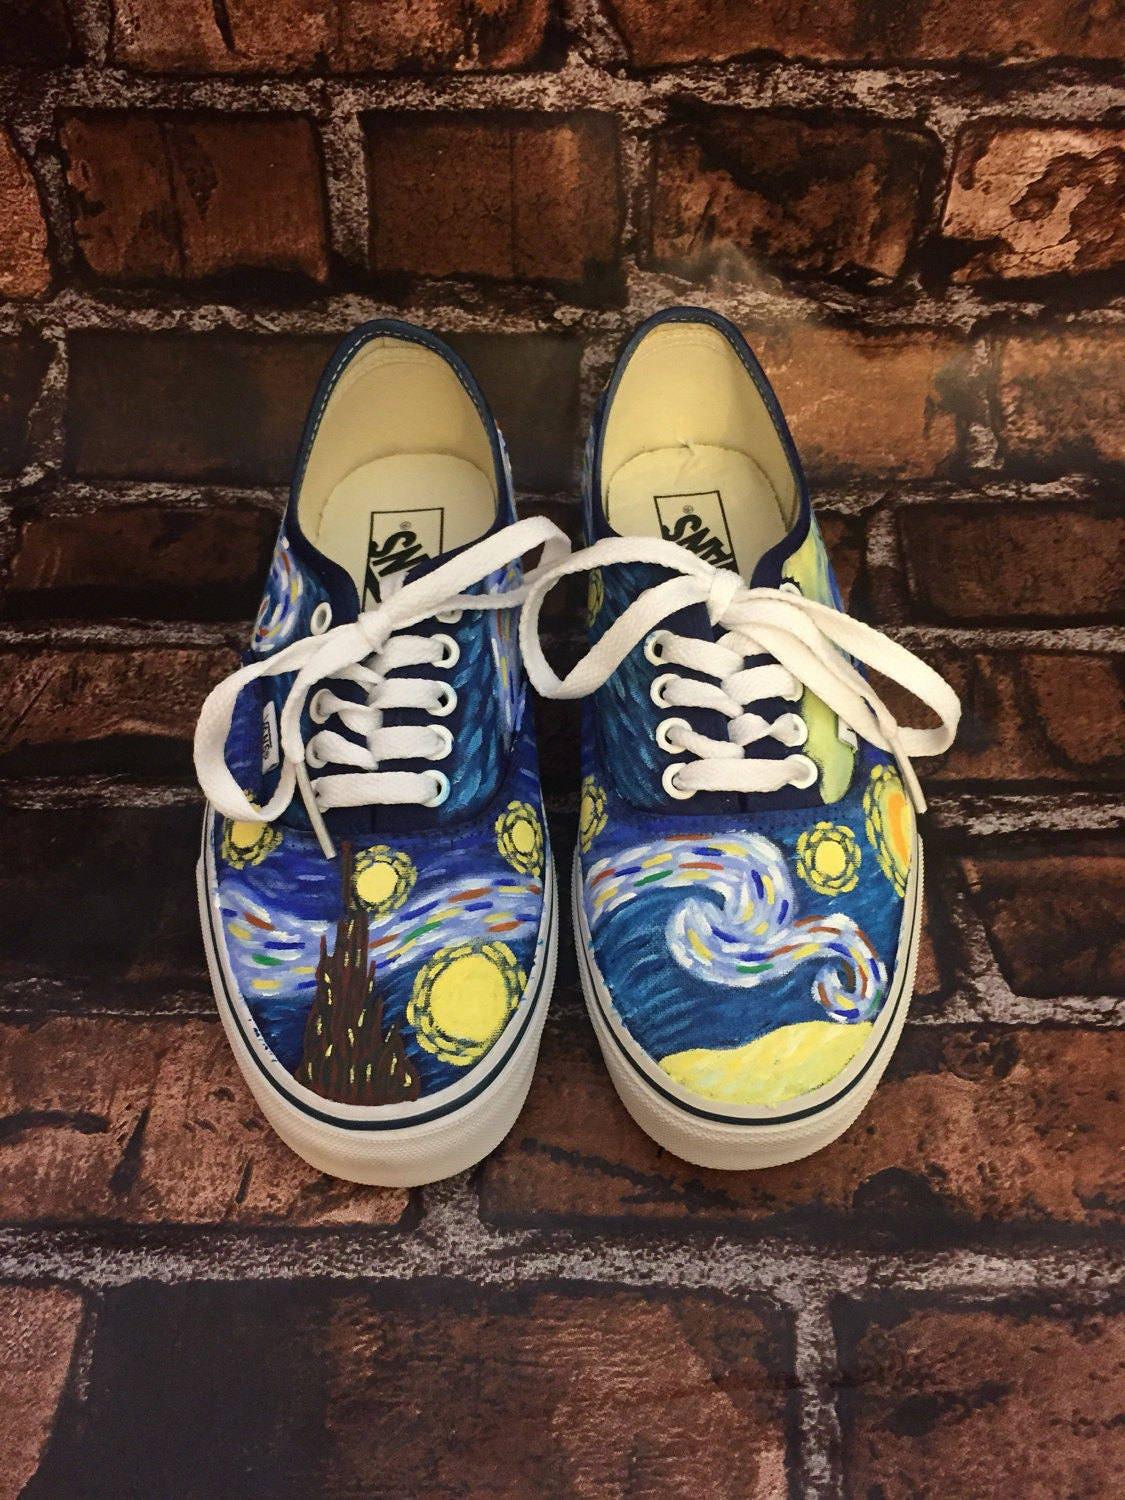 Starry Night Shoes